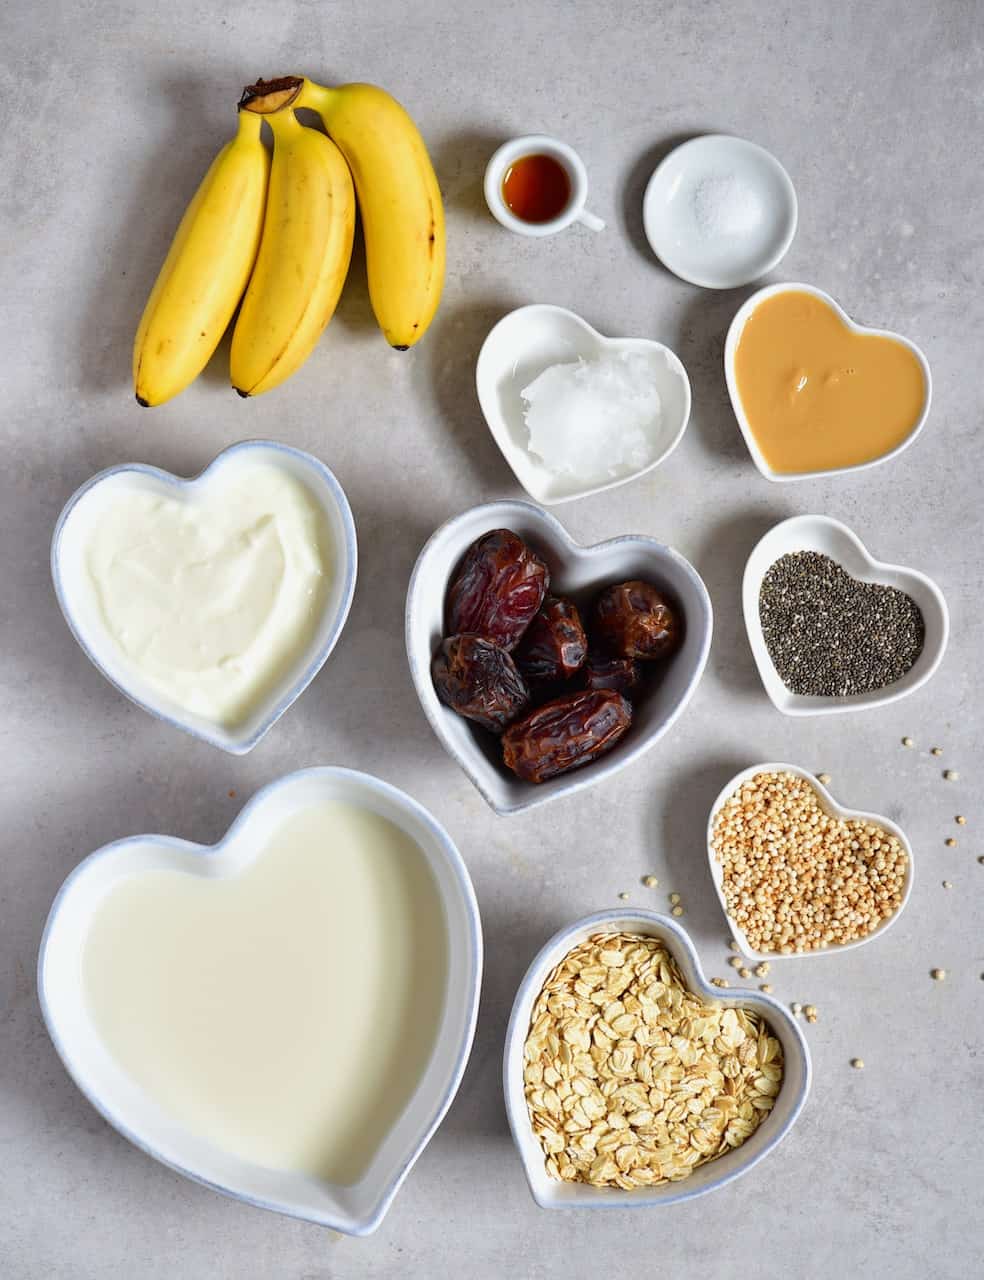 Ingredients for Salted Caramel Overnight Oats